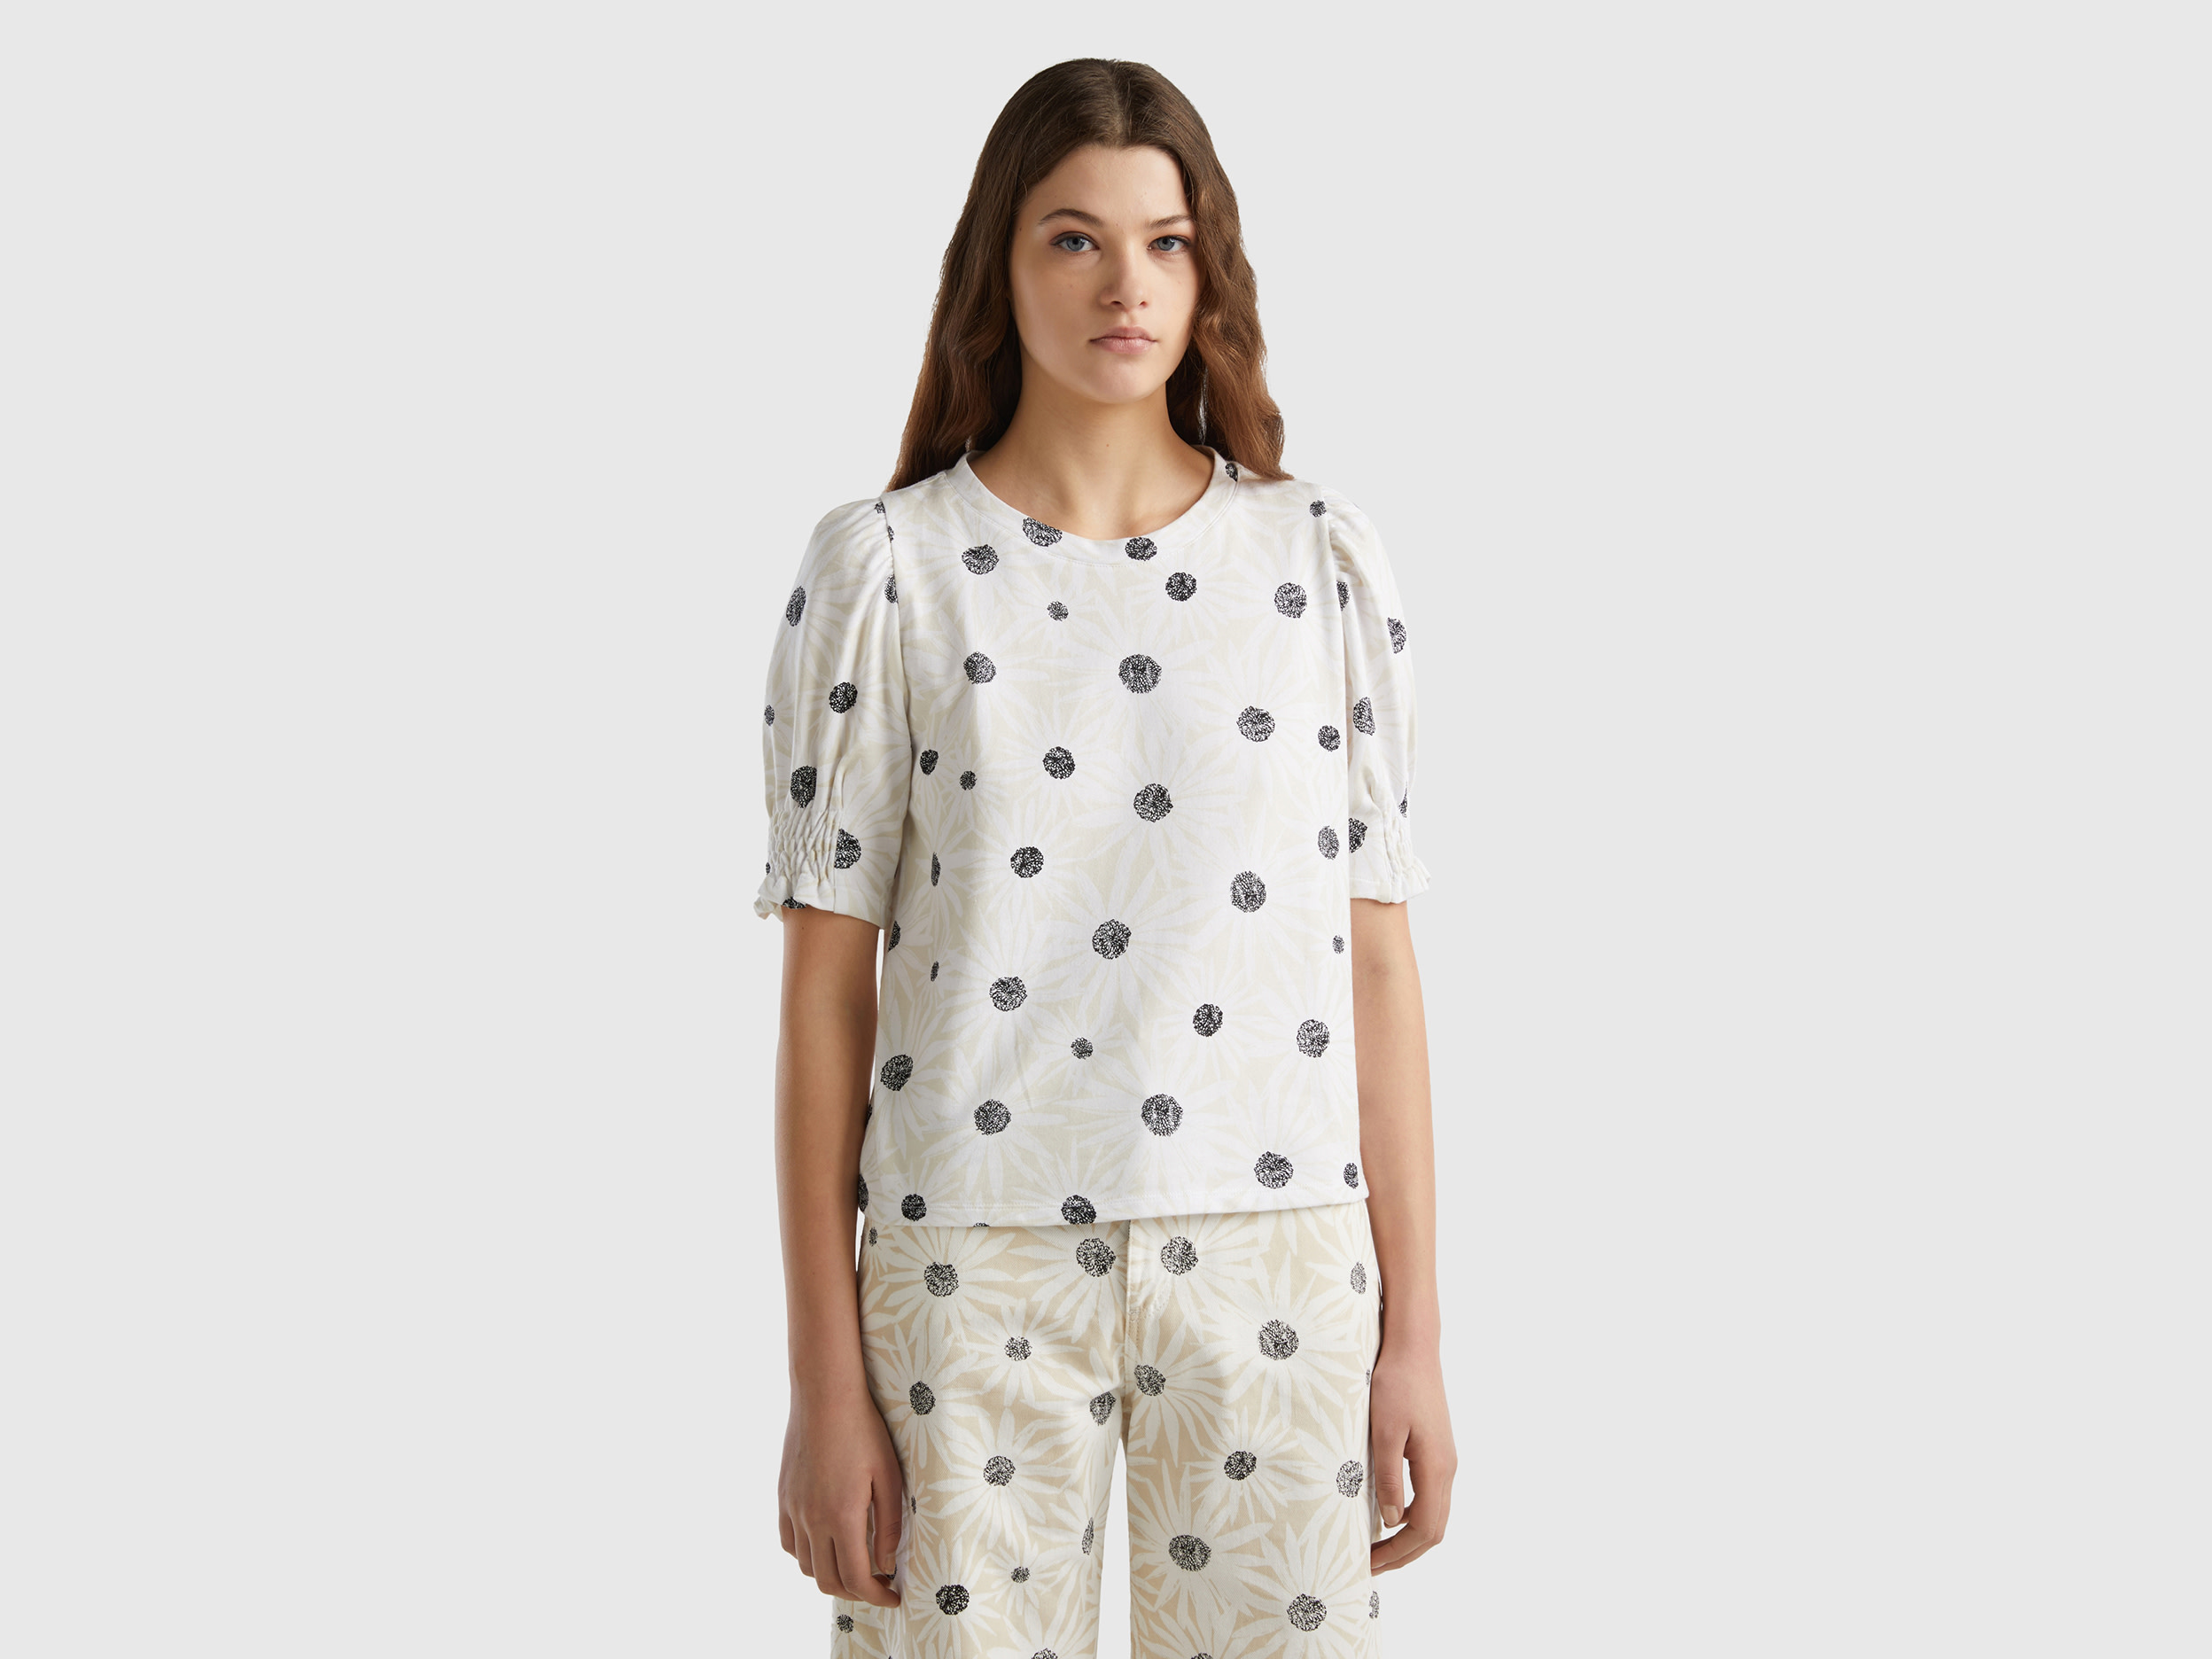 Image of Benetton, Organic Cotton T-shirt With Floral Print, size S, White, Women